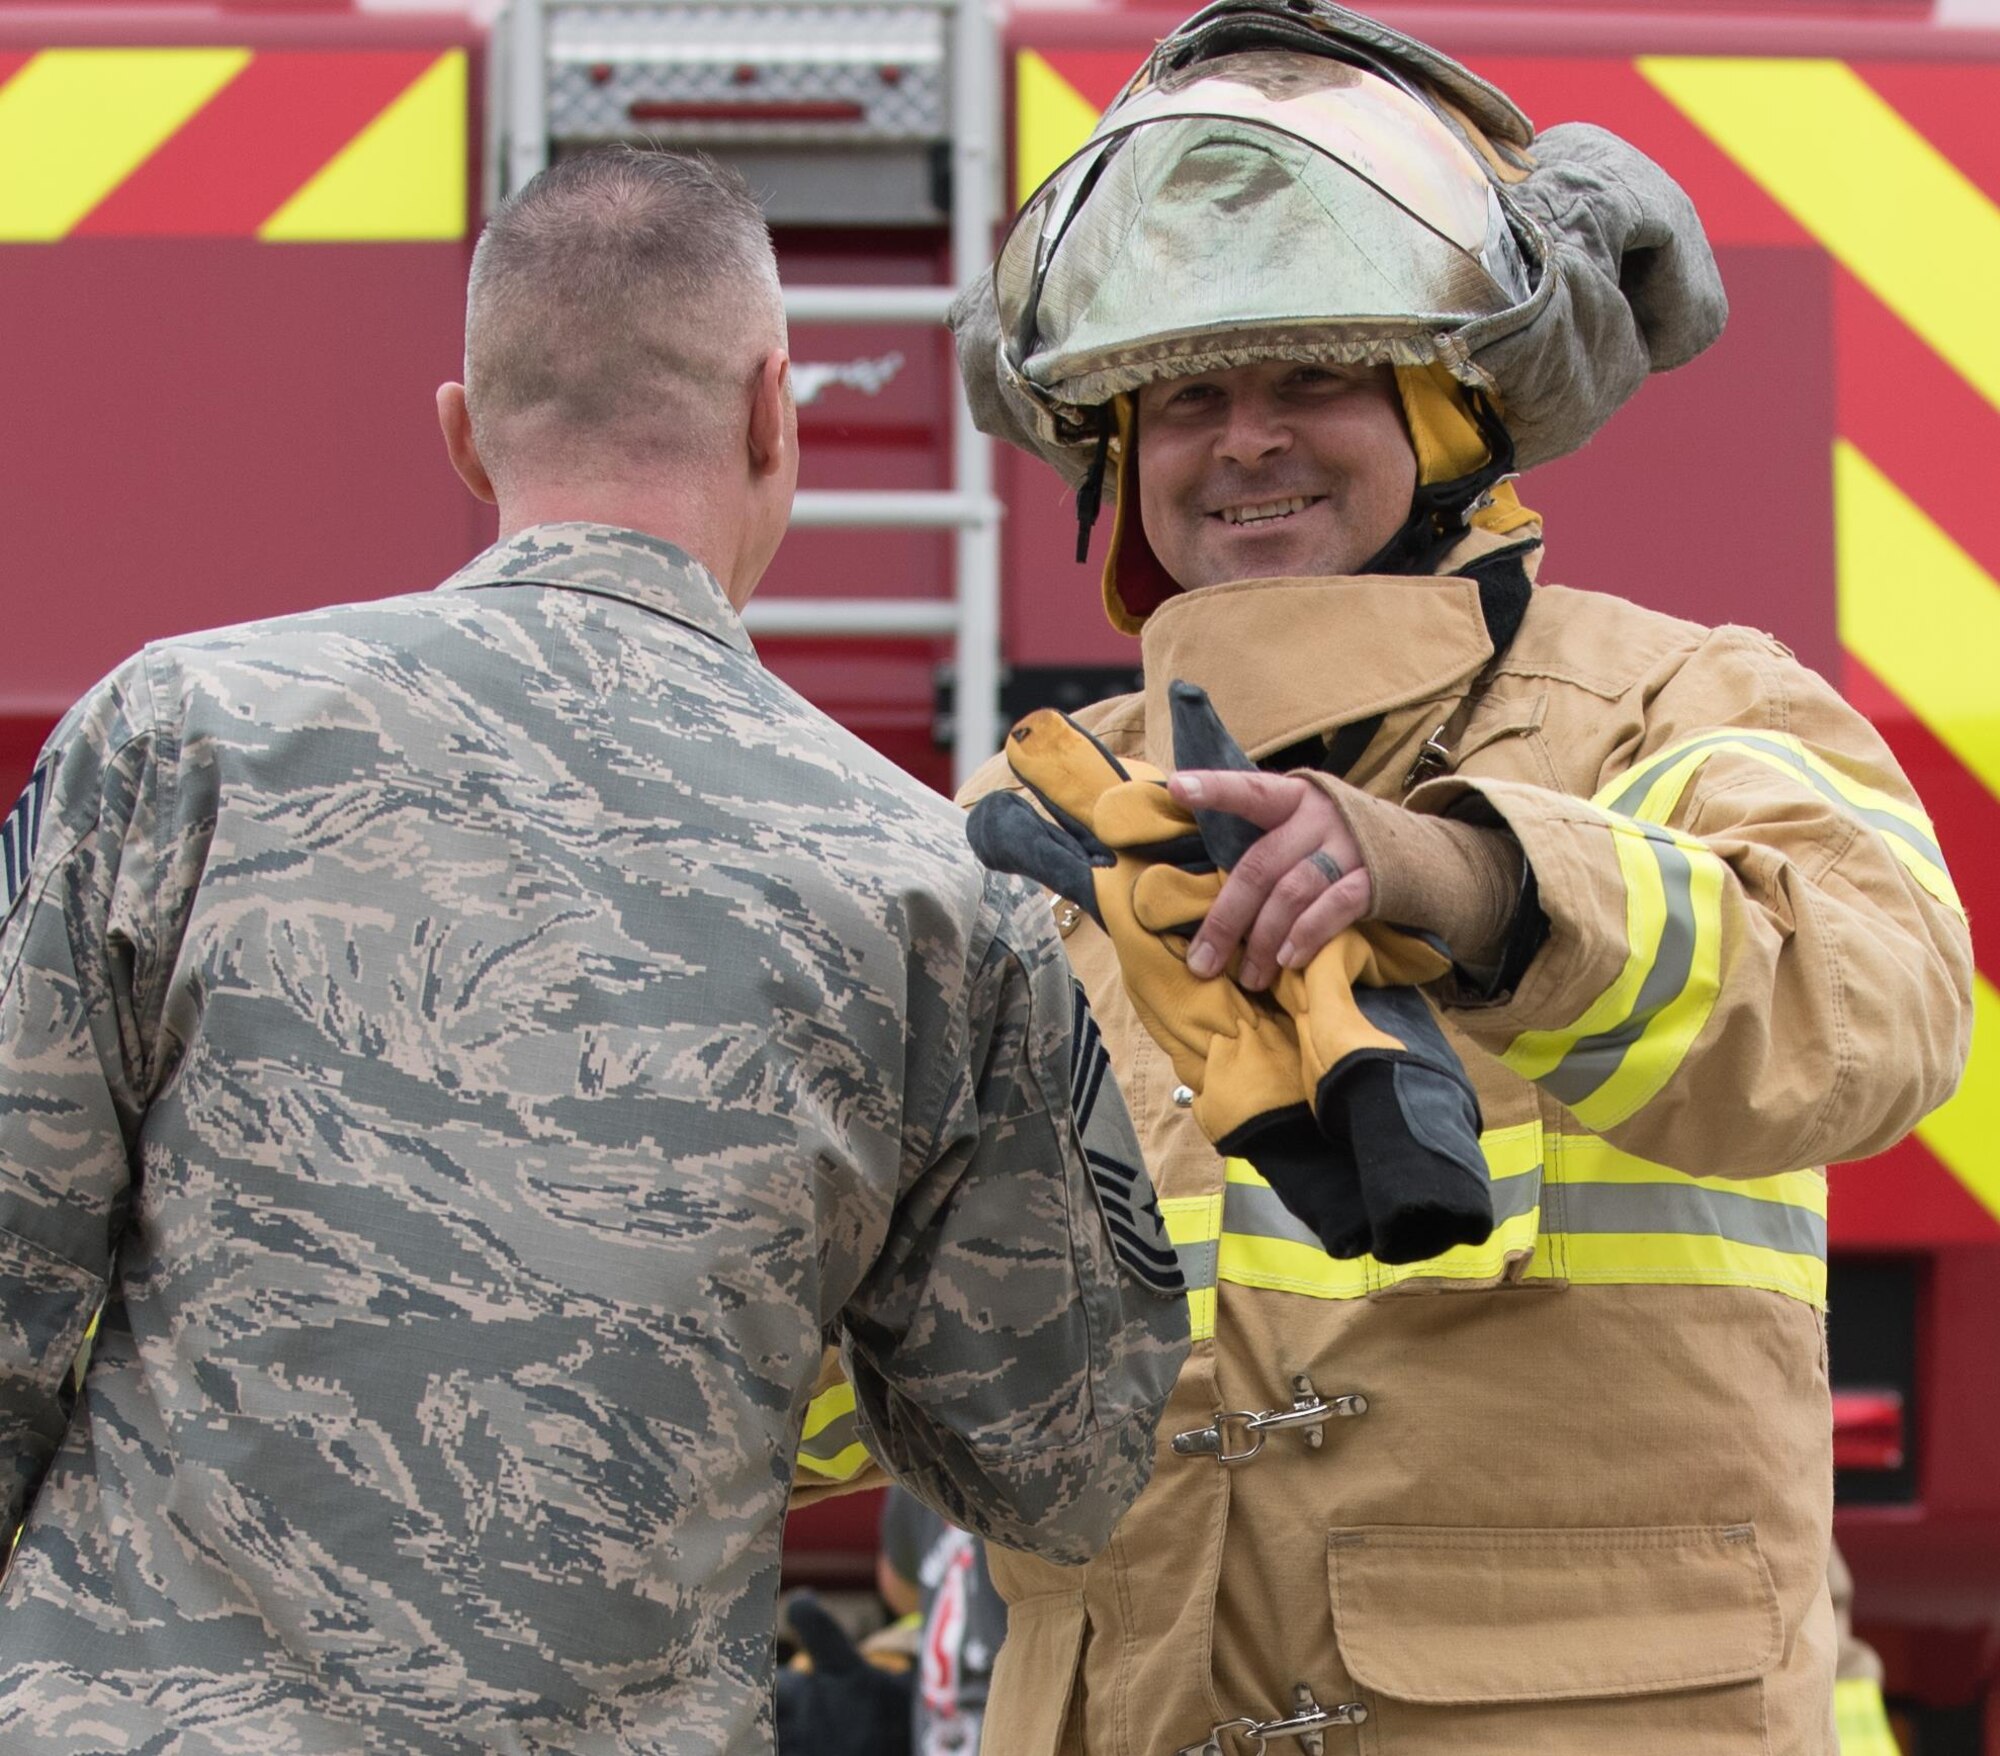 U.S. Air Force Chief Master Sgt. Matthew Mancill, Firefighter Combat Challenge 633rd Mission Support Group team member, celebrates after completing the challenge at Joint Base Langley-Eustis, Va., Oct. 13, 2017.